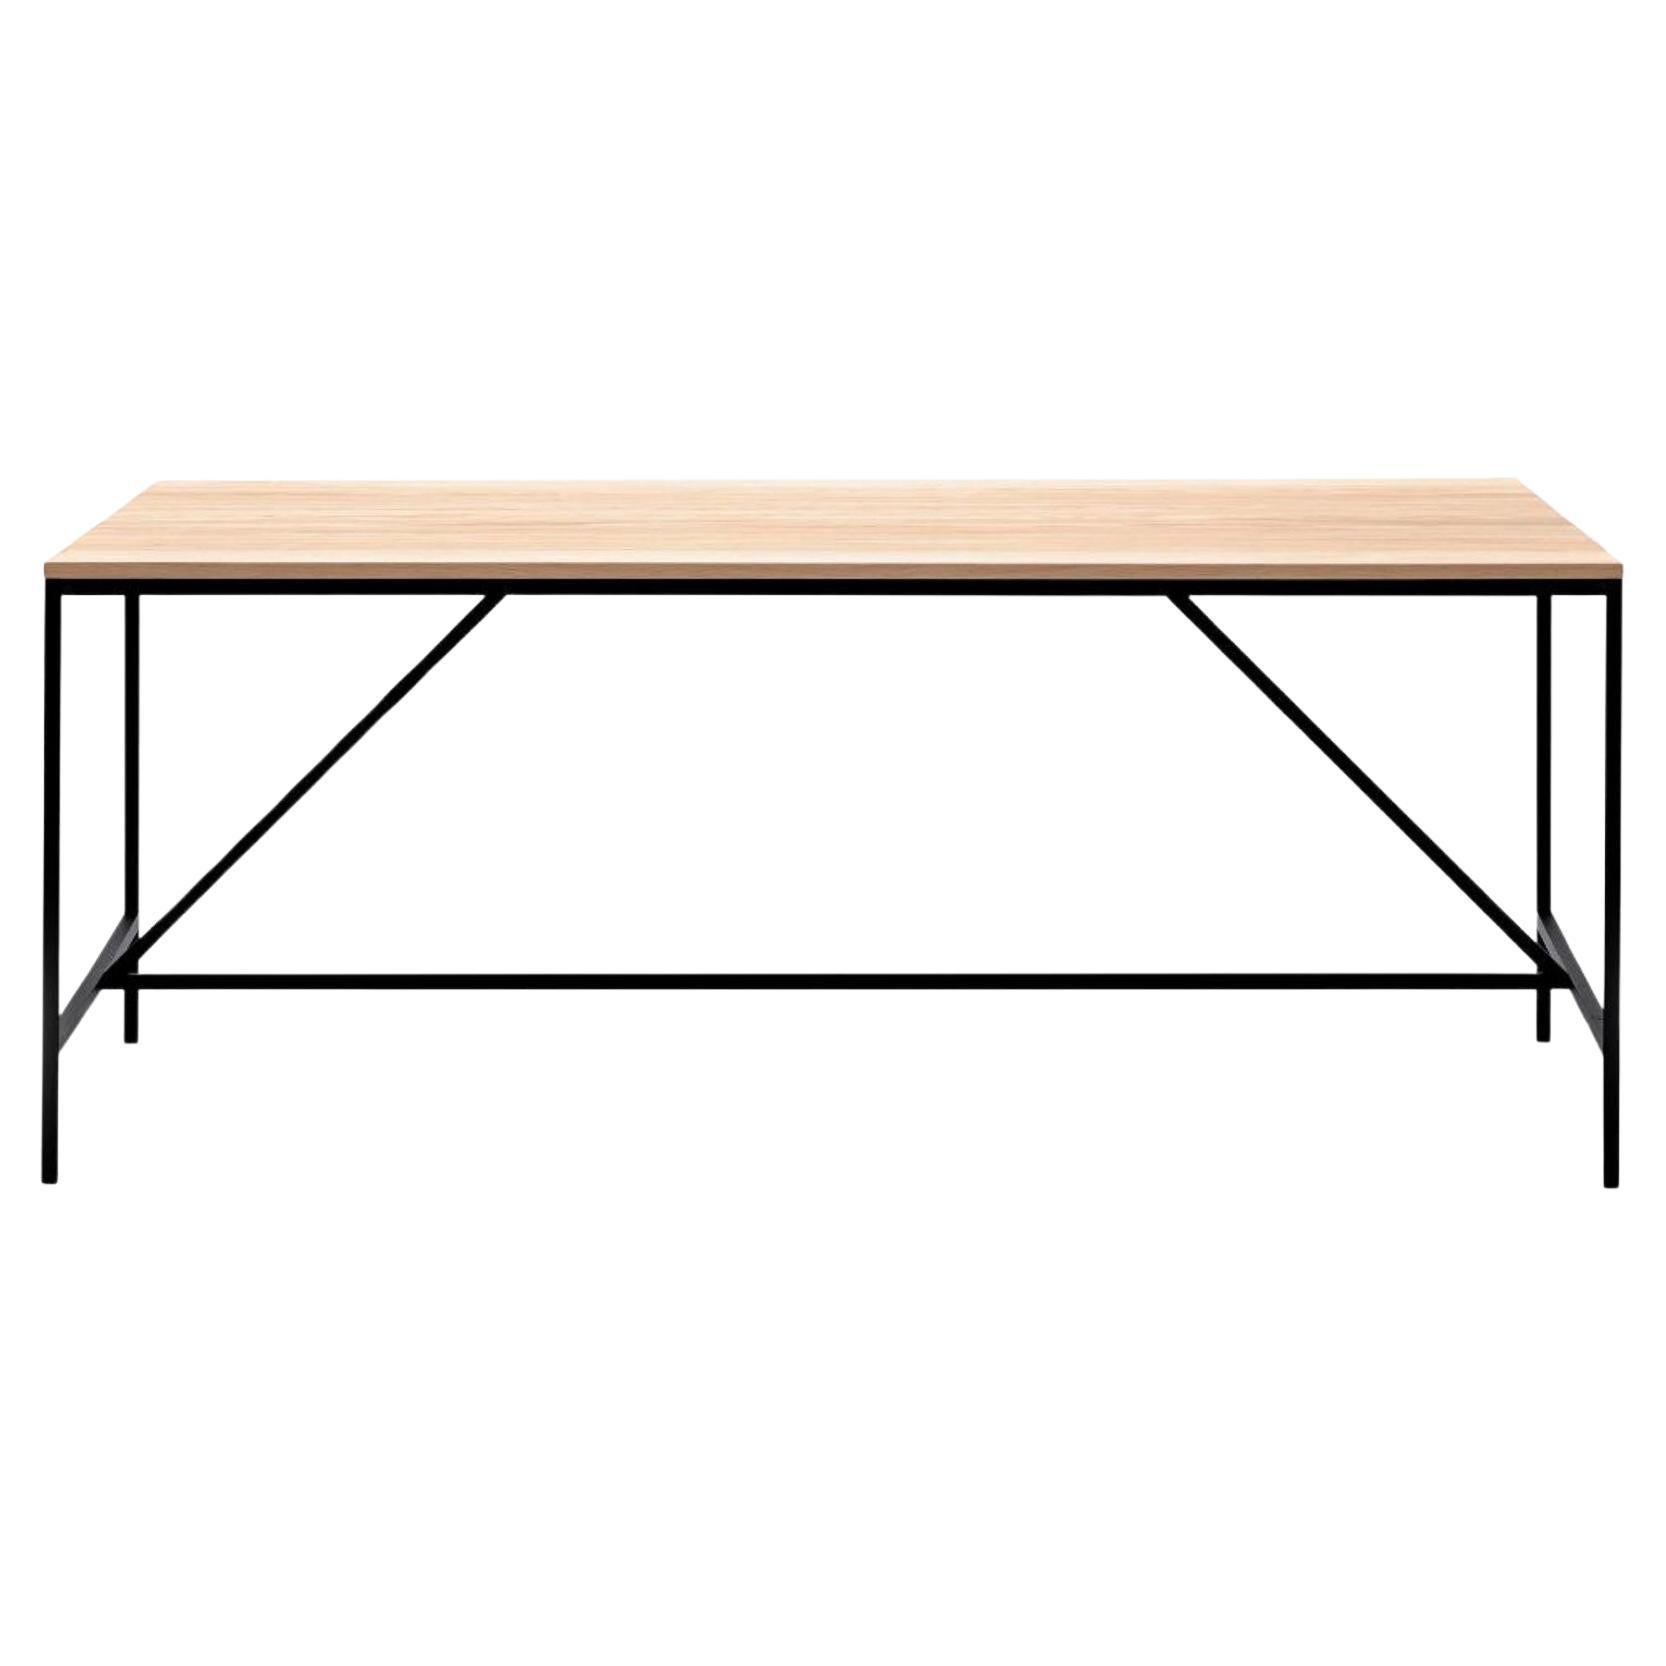 The price given applies to the table with 180cm width. The price for the larger version in 260cm is 5.900€.  Table top in oak veneer, frame in steel. Finish: Lacquered tabletop, powder coated frame

Beautiful Dining Table for The Cache series, part